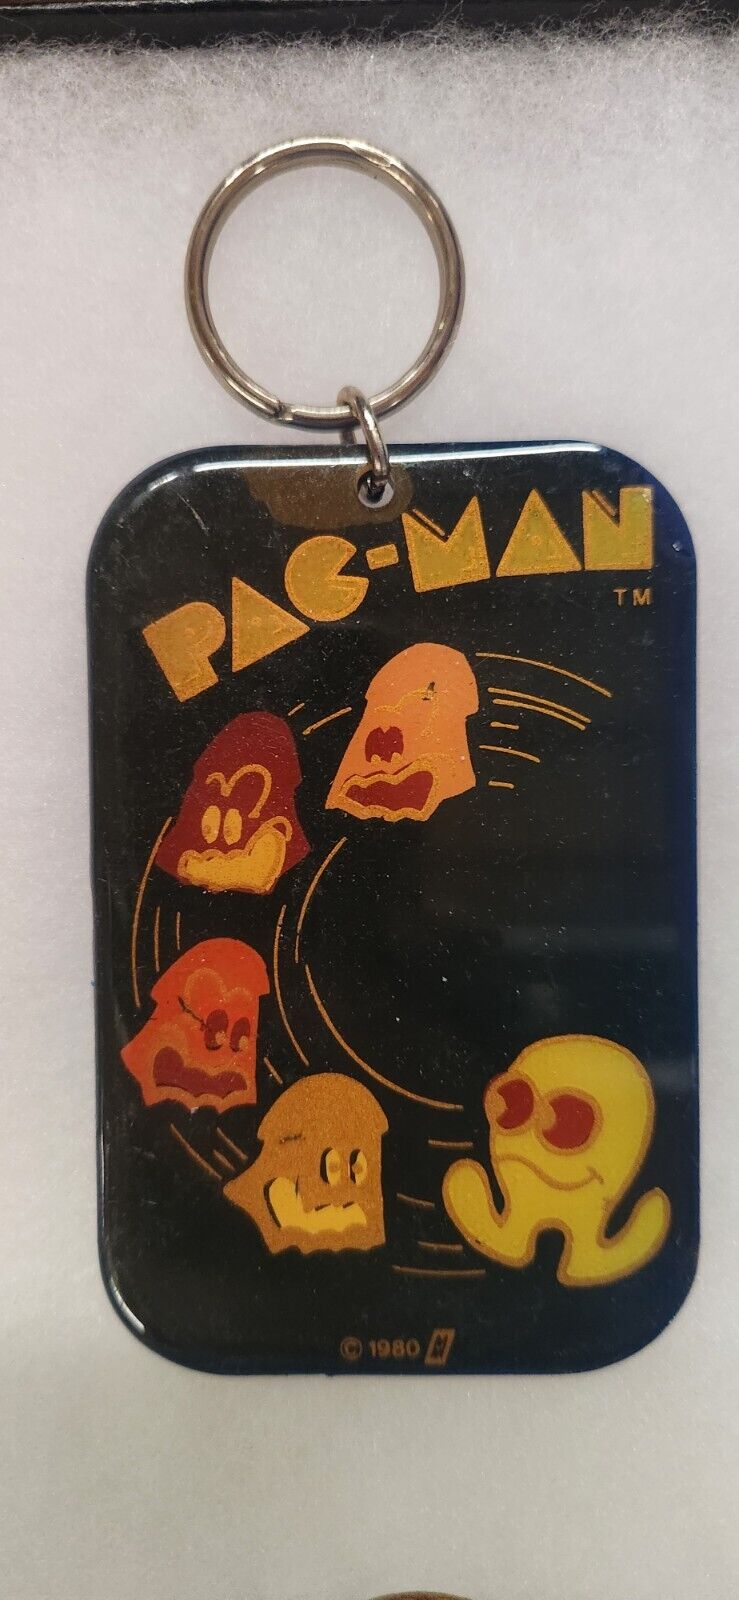 HUGE RARE BLACK 1970s Vintage Pac Man Ghost Keychain Novelty Arcade Collectible